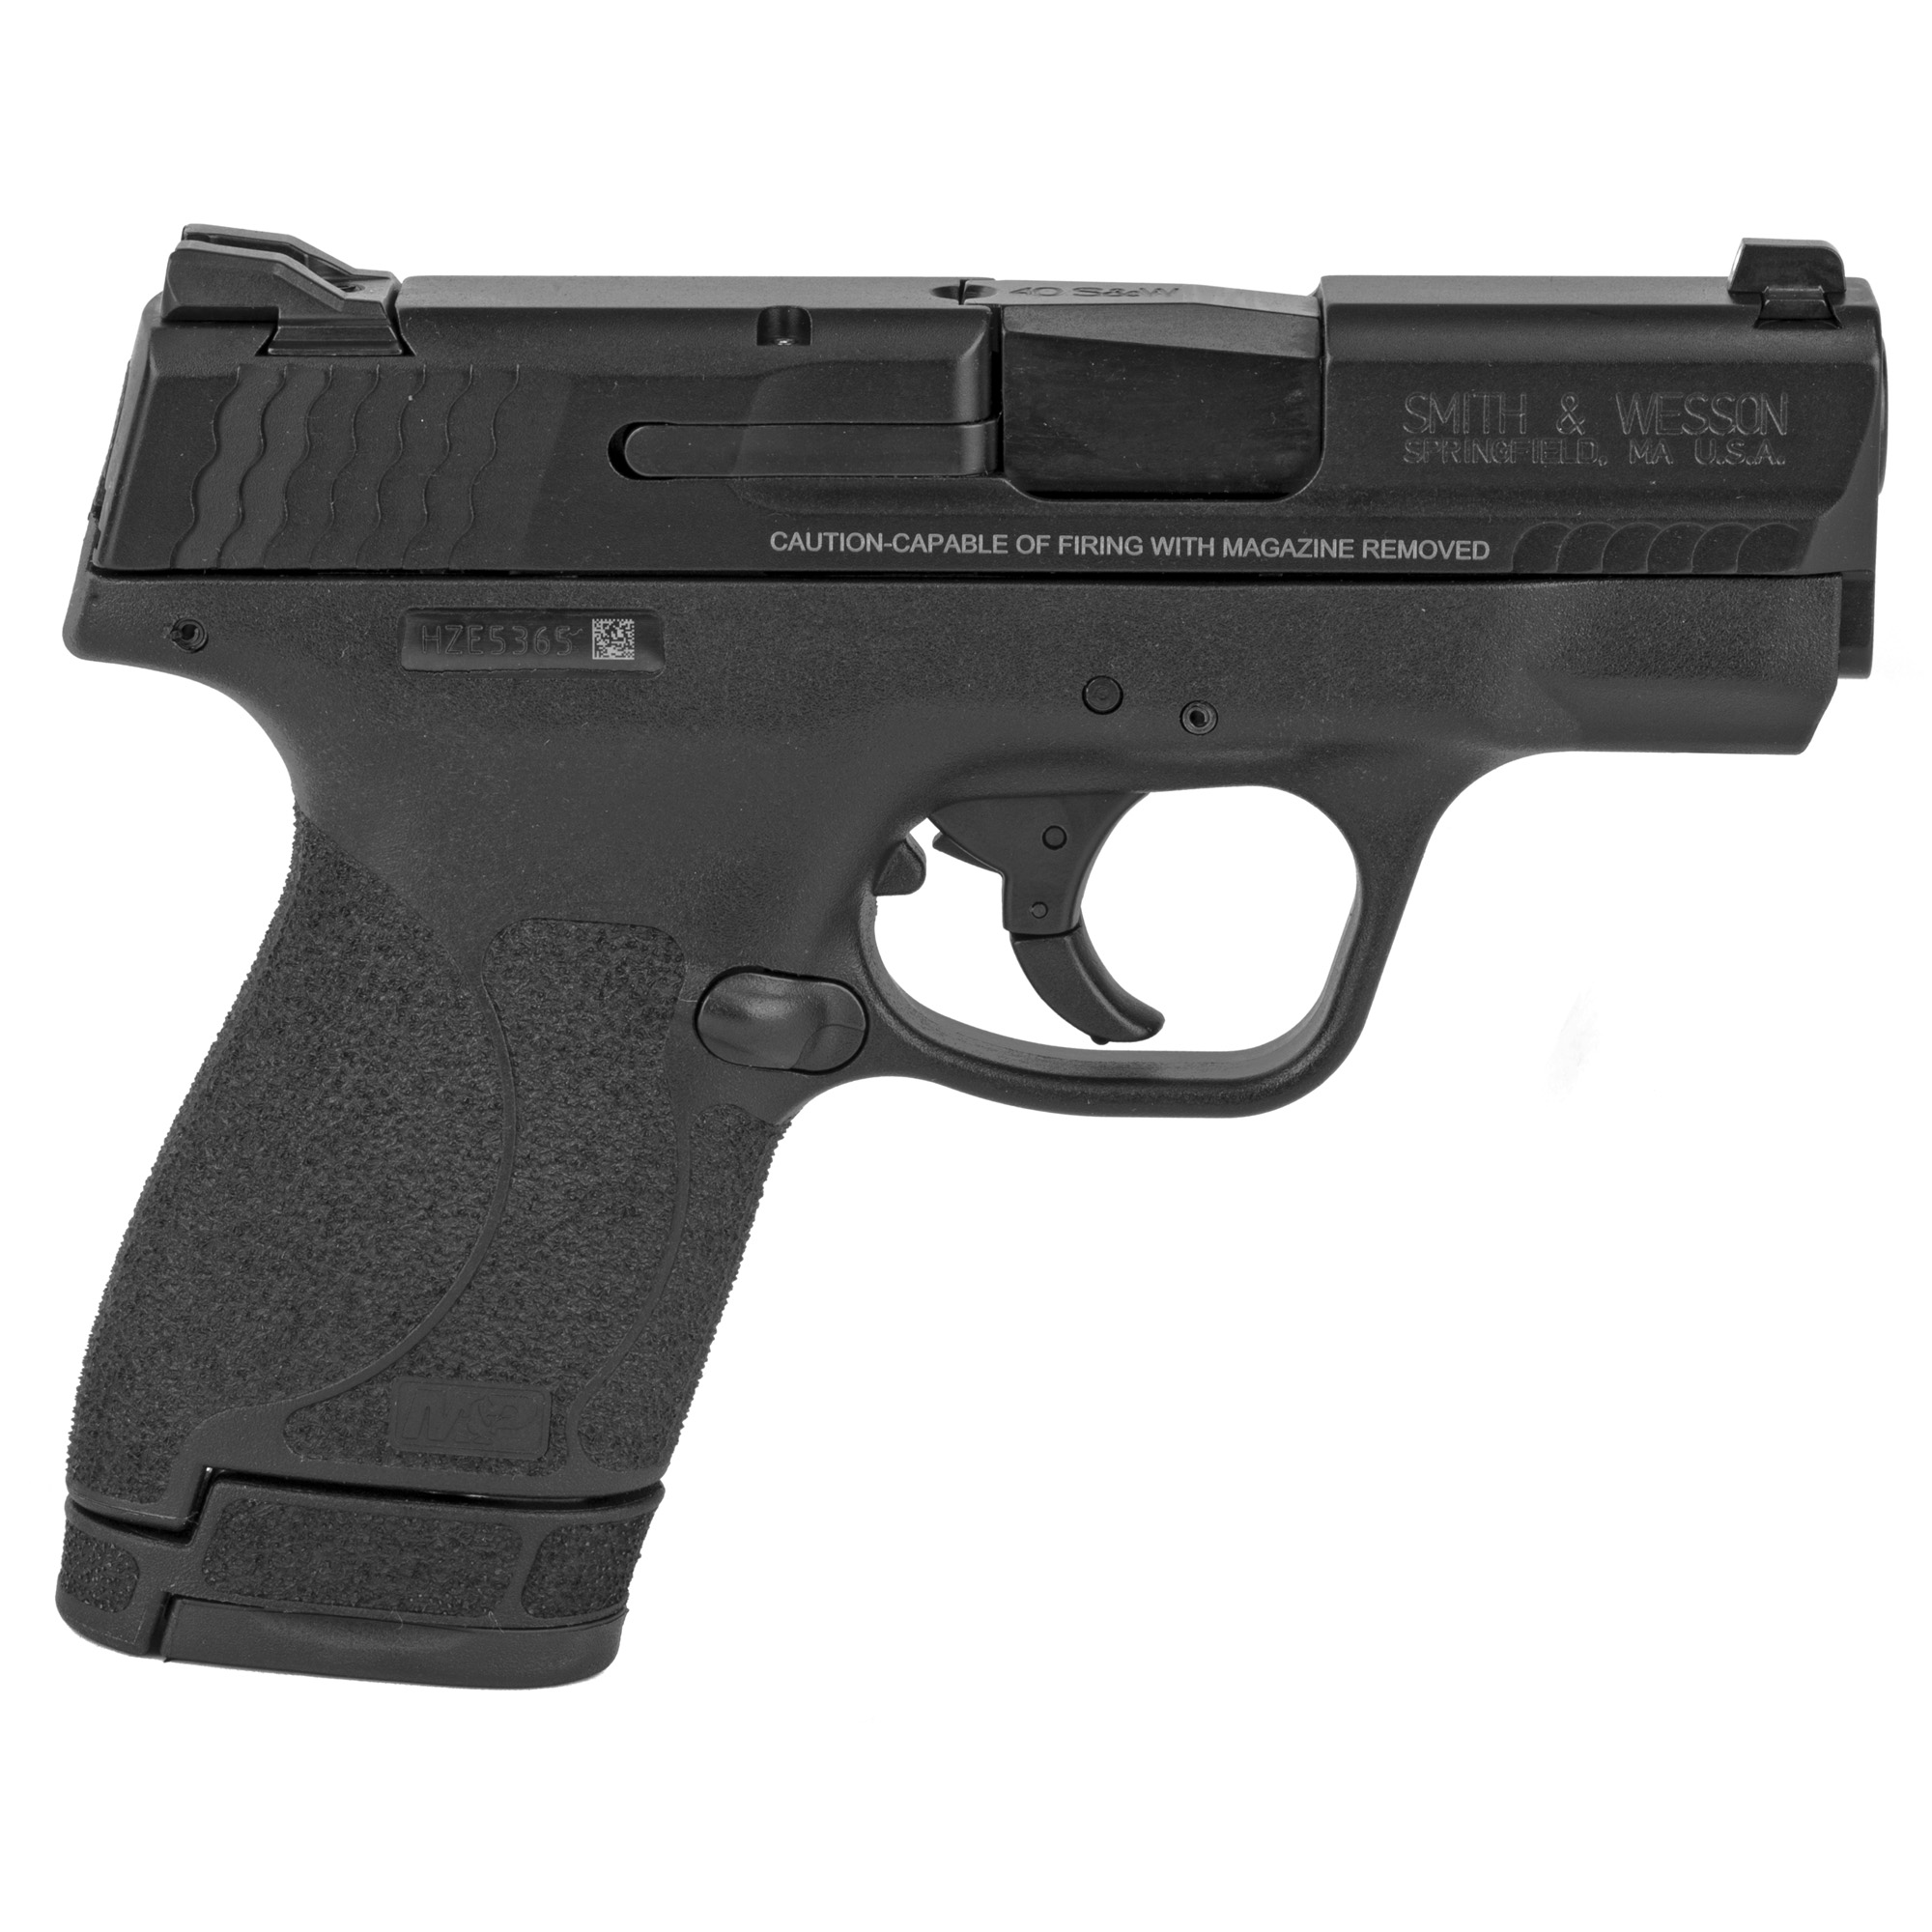 Smith & Wesson, Shield M2.0, Striker Fired, Semi-automatic, Polymer Frame Pistol, Micro-Compact, 40 S&W, 3.1" Barrel, Armornite Finish, Black, 3 Dot Sights, No Thumb Safety, 2 Magazines (1) 6-Round and (1) 7-Round